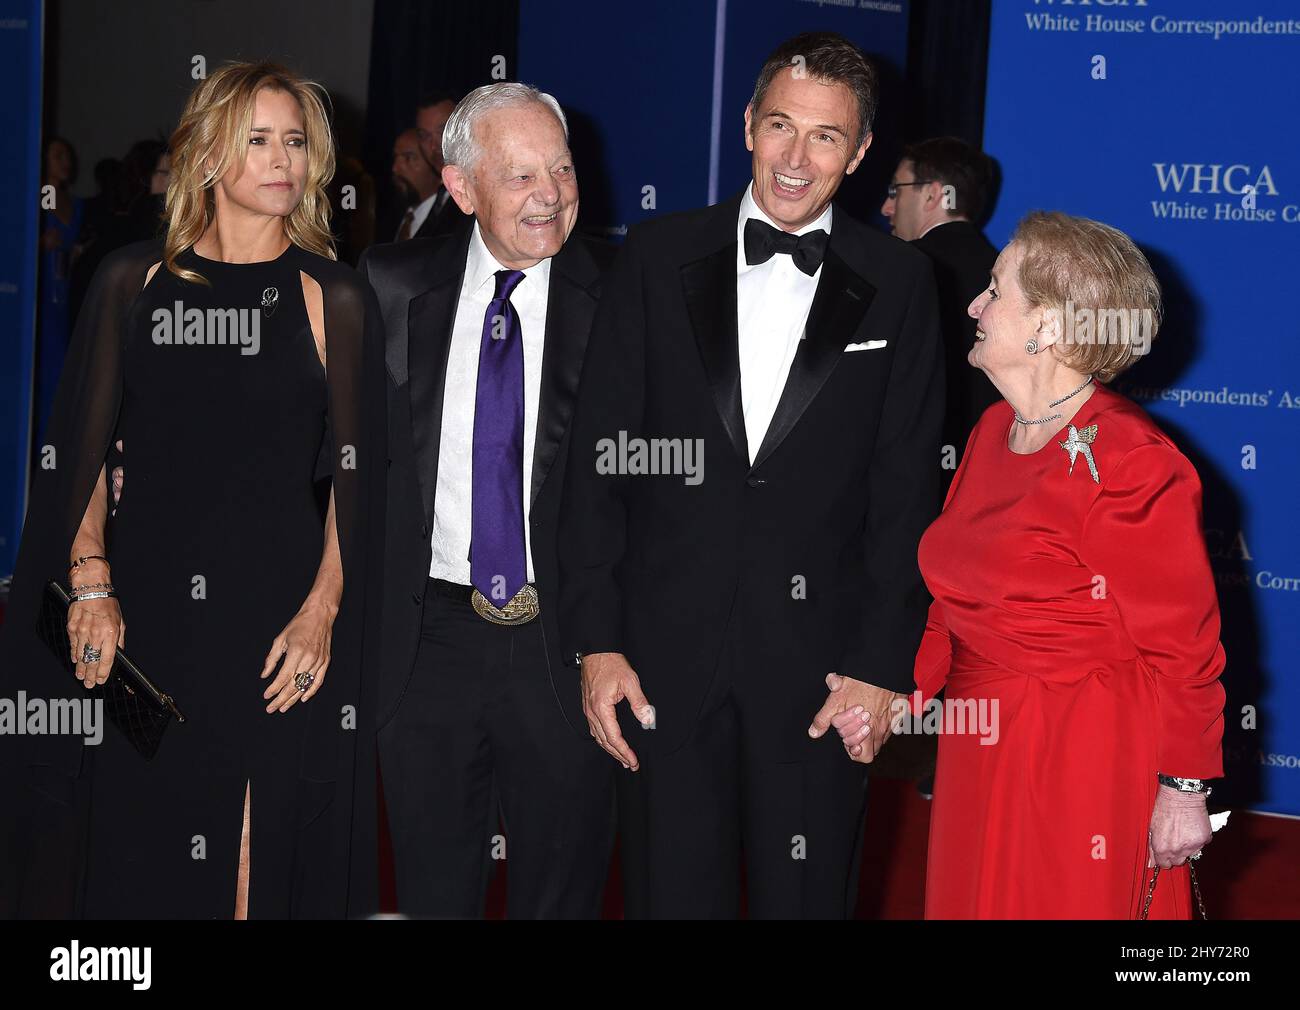 Tea Leoni, Bob Woodard, Tim Daly & Madeline Albright attends the White House Correspondents Association Dinner 2015 held at the Hilton Hotel. Stock Photo